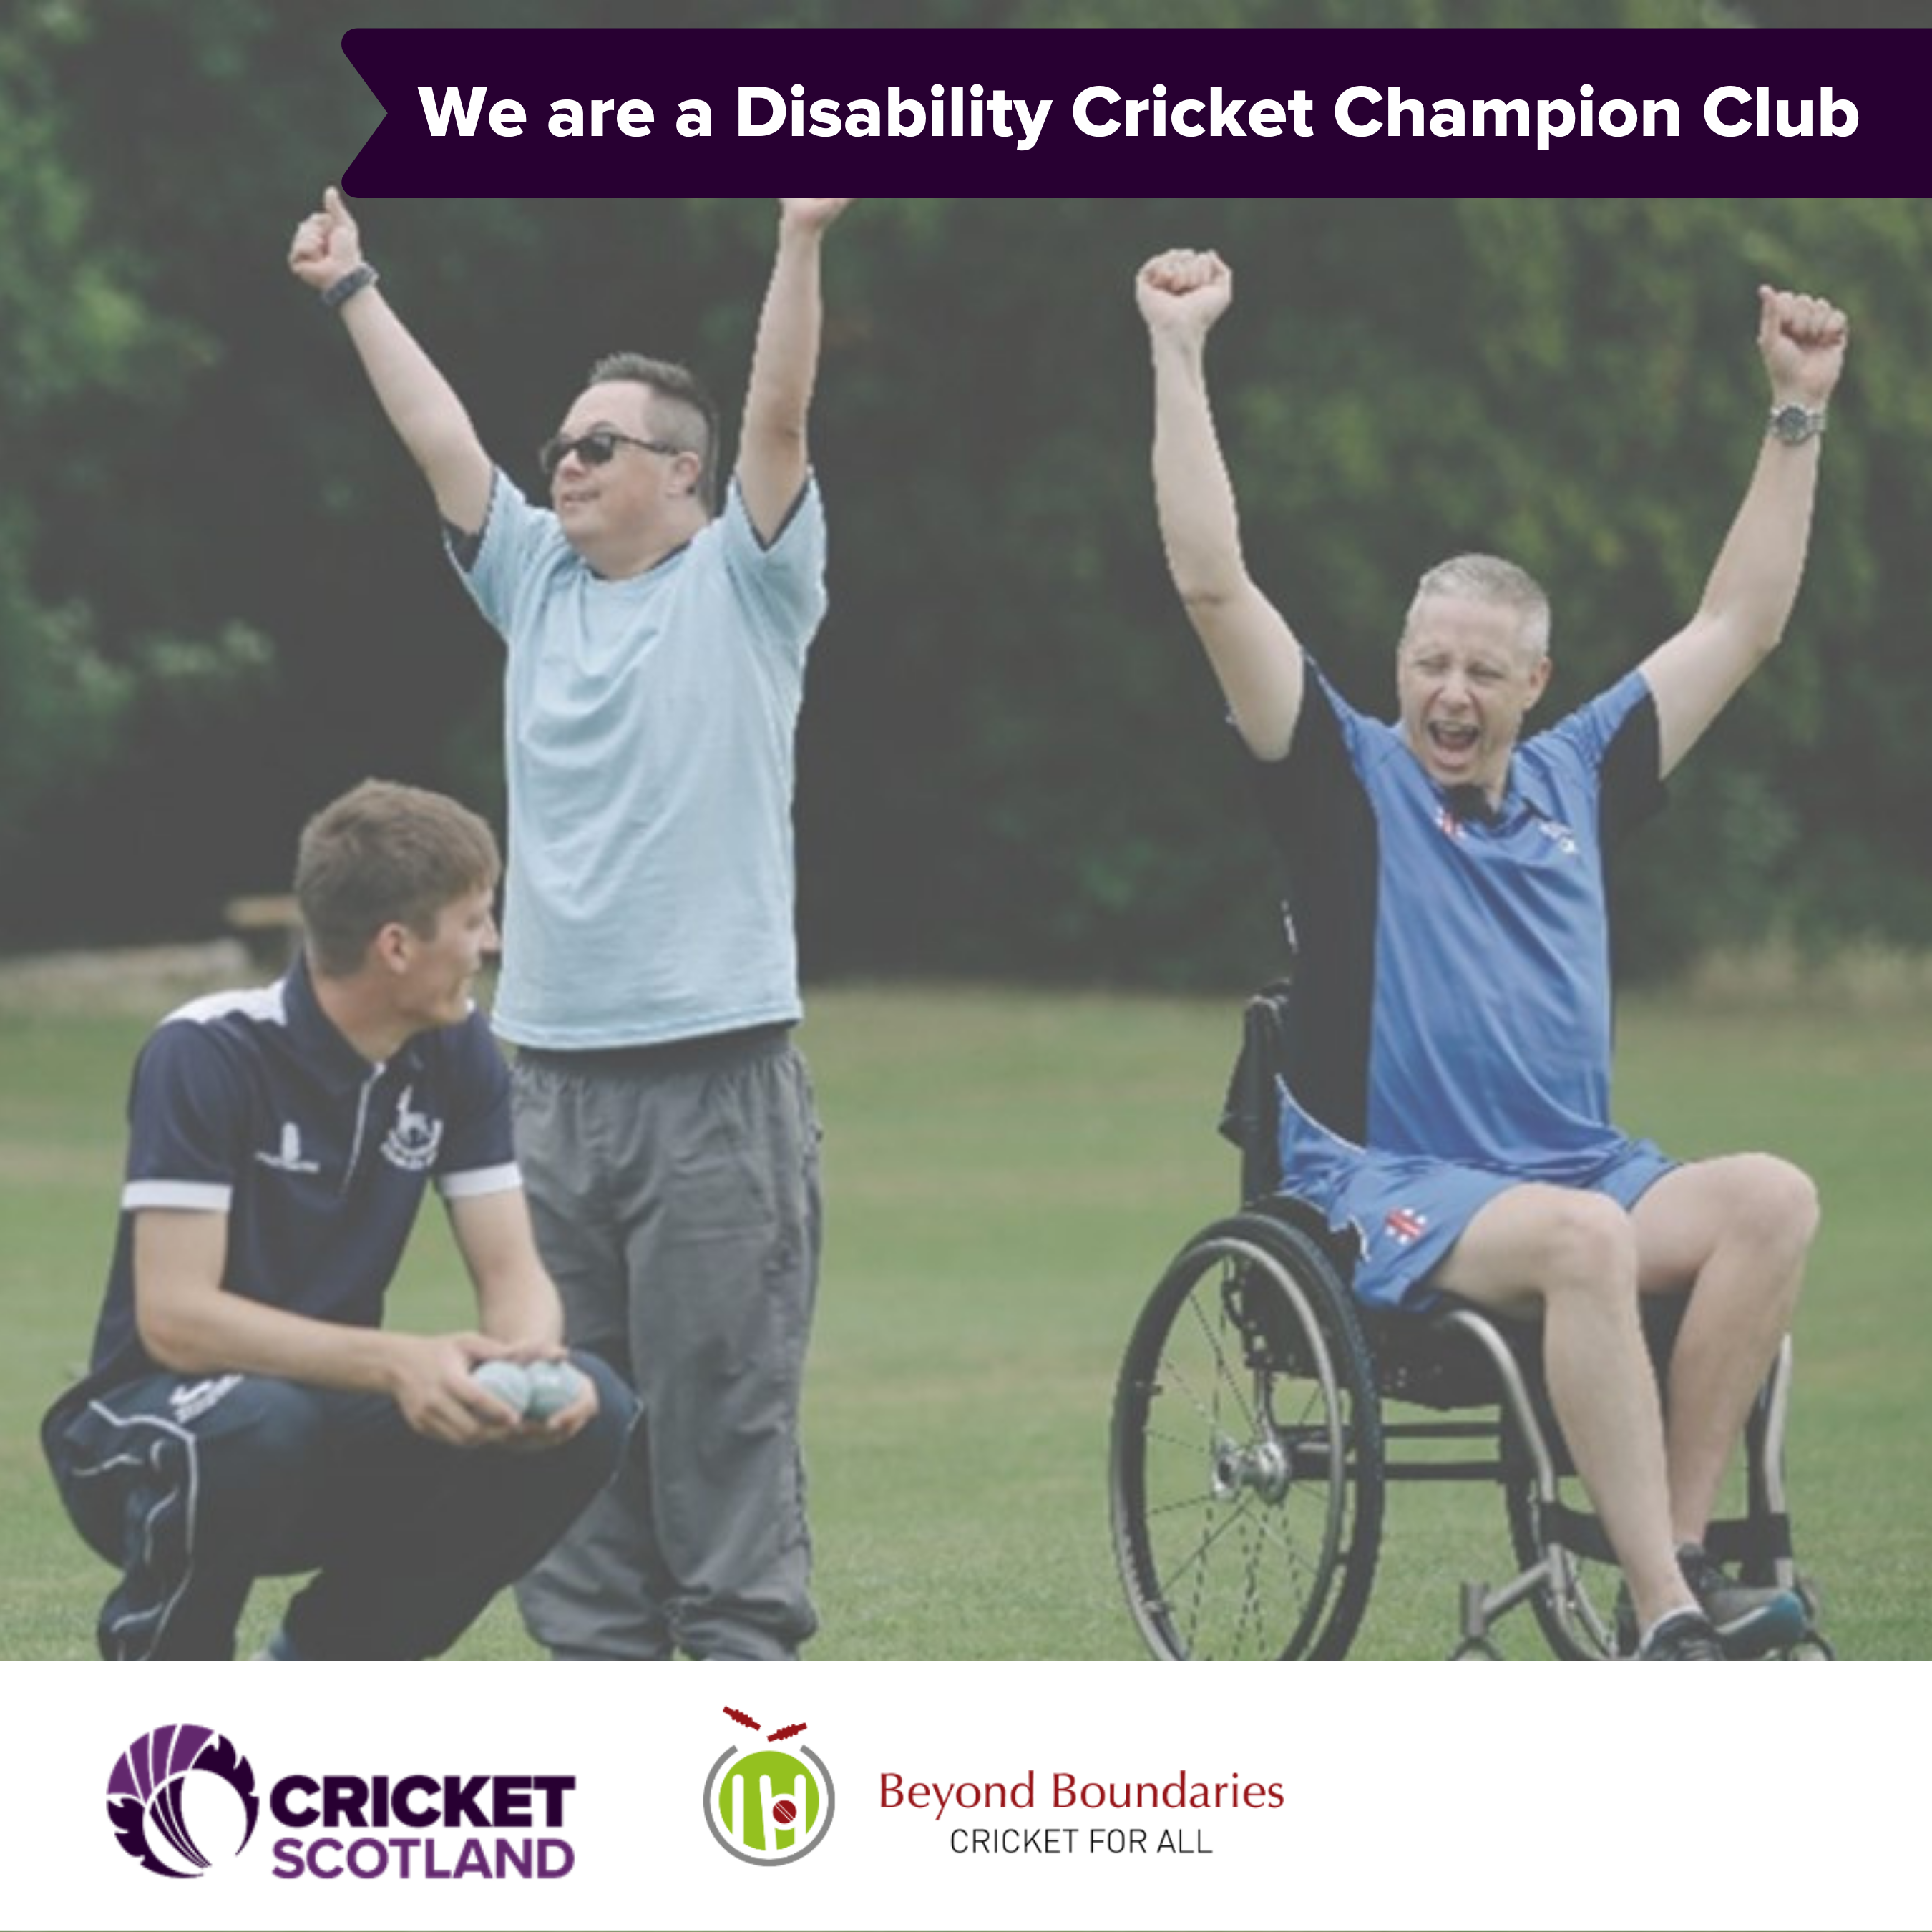 Disability Cricket Champion Clubs: Strathmore CC